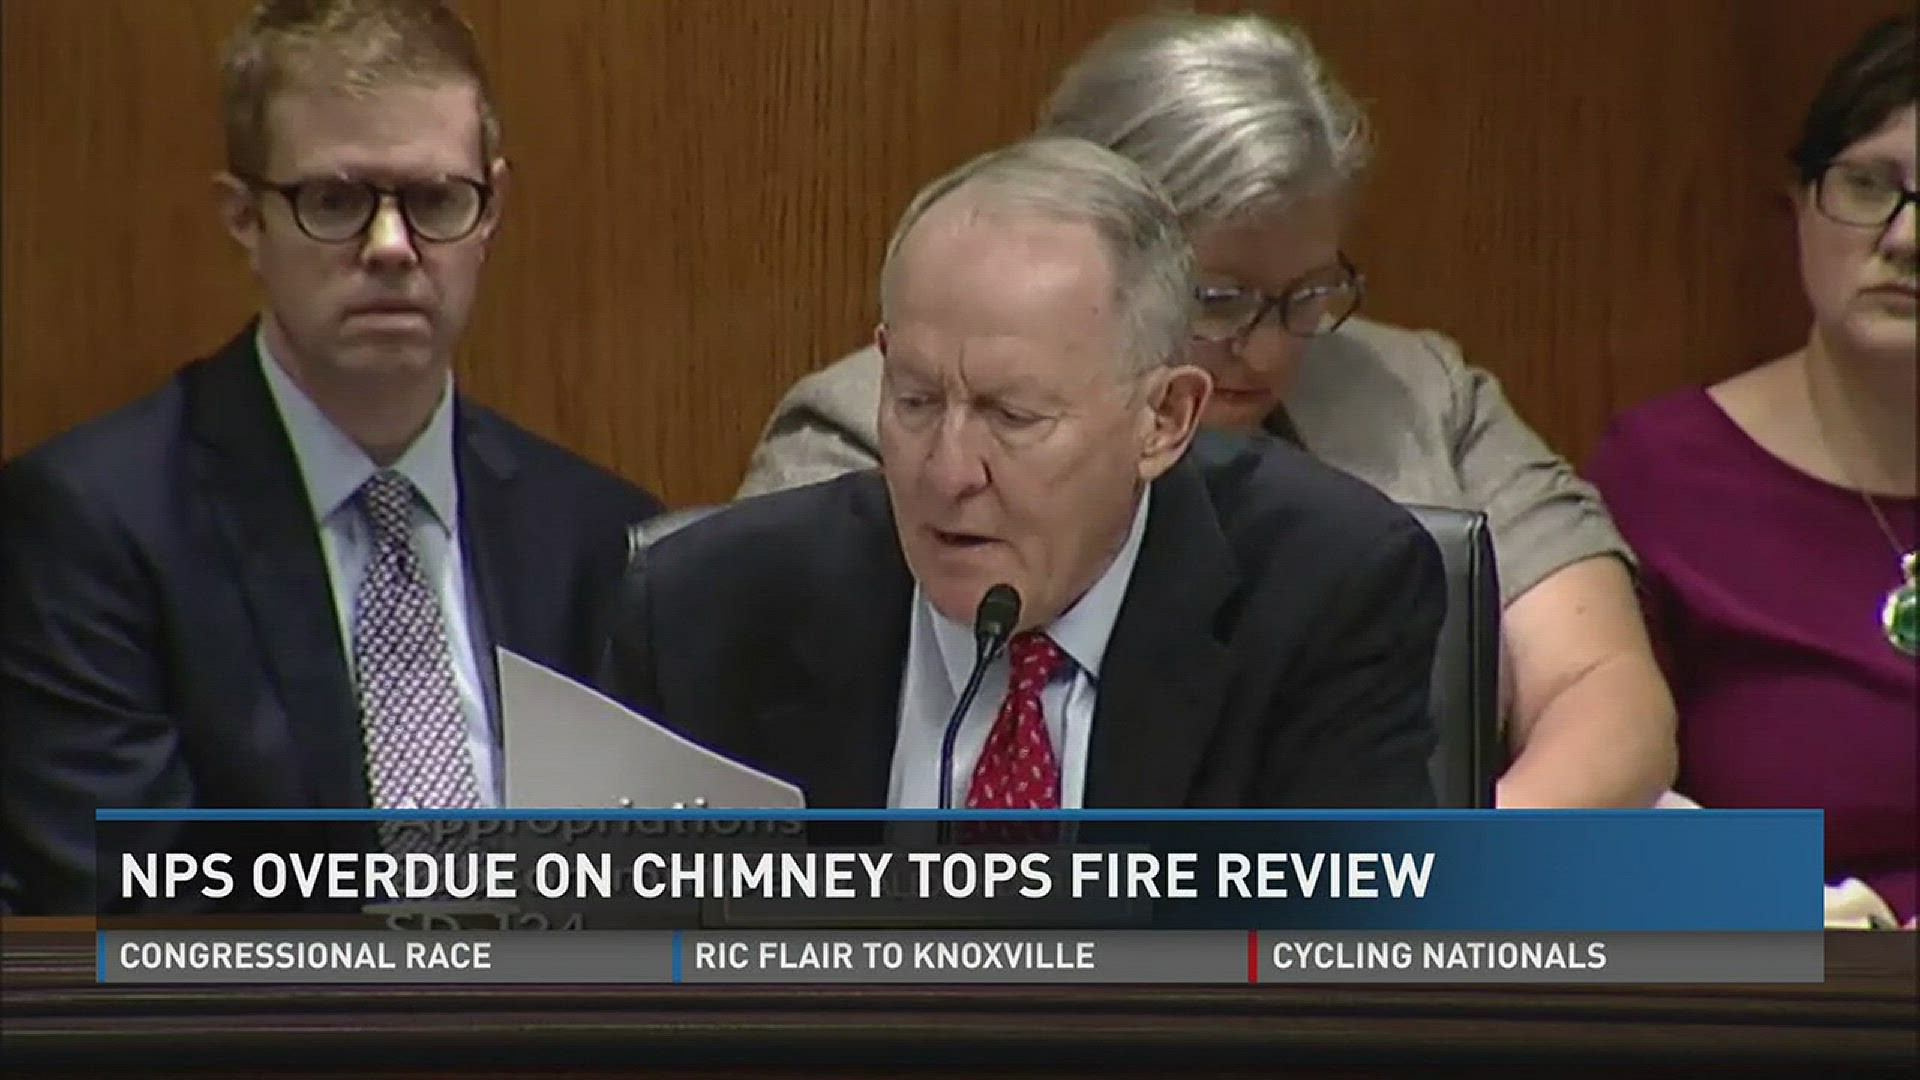 June 21, 2017: Sen. Lamar Alexander quizzed the U.S. Secretary of Interior about a report on the deadly November wildfires.